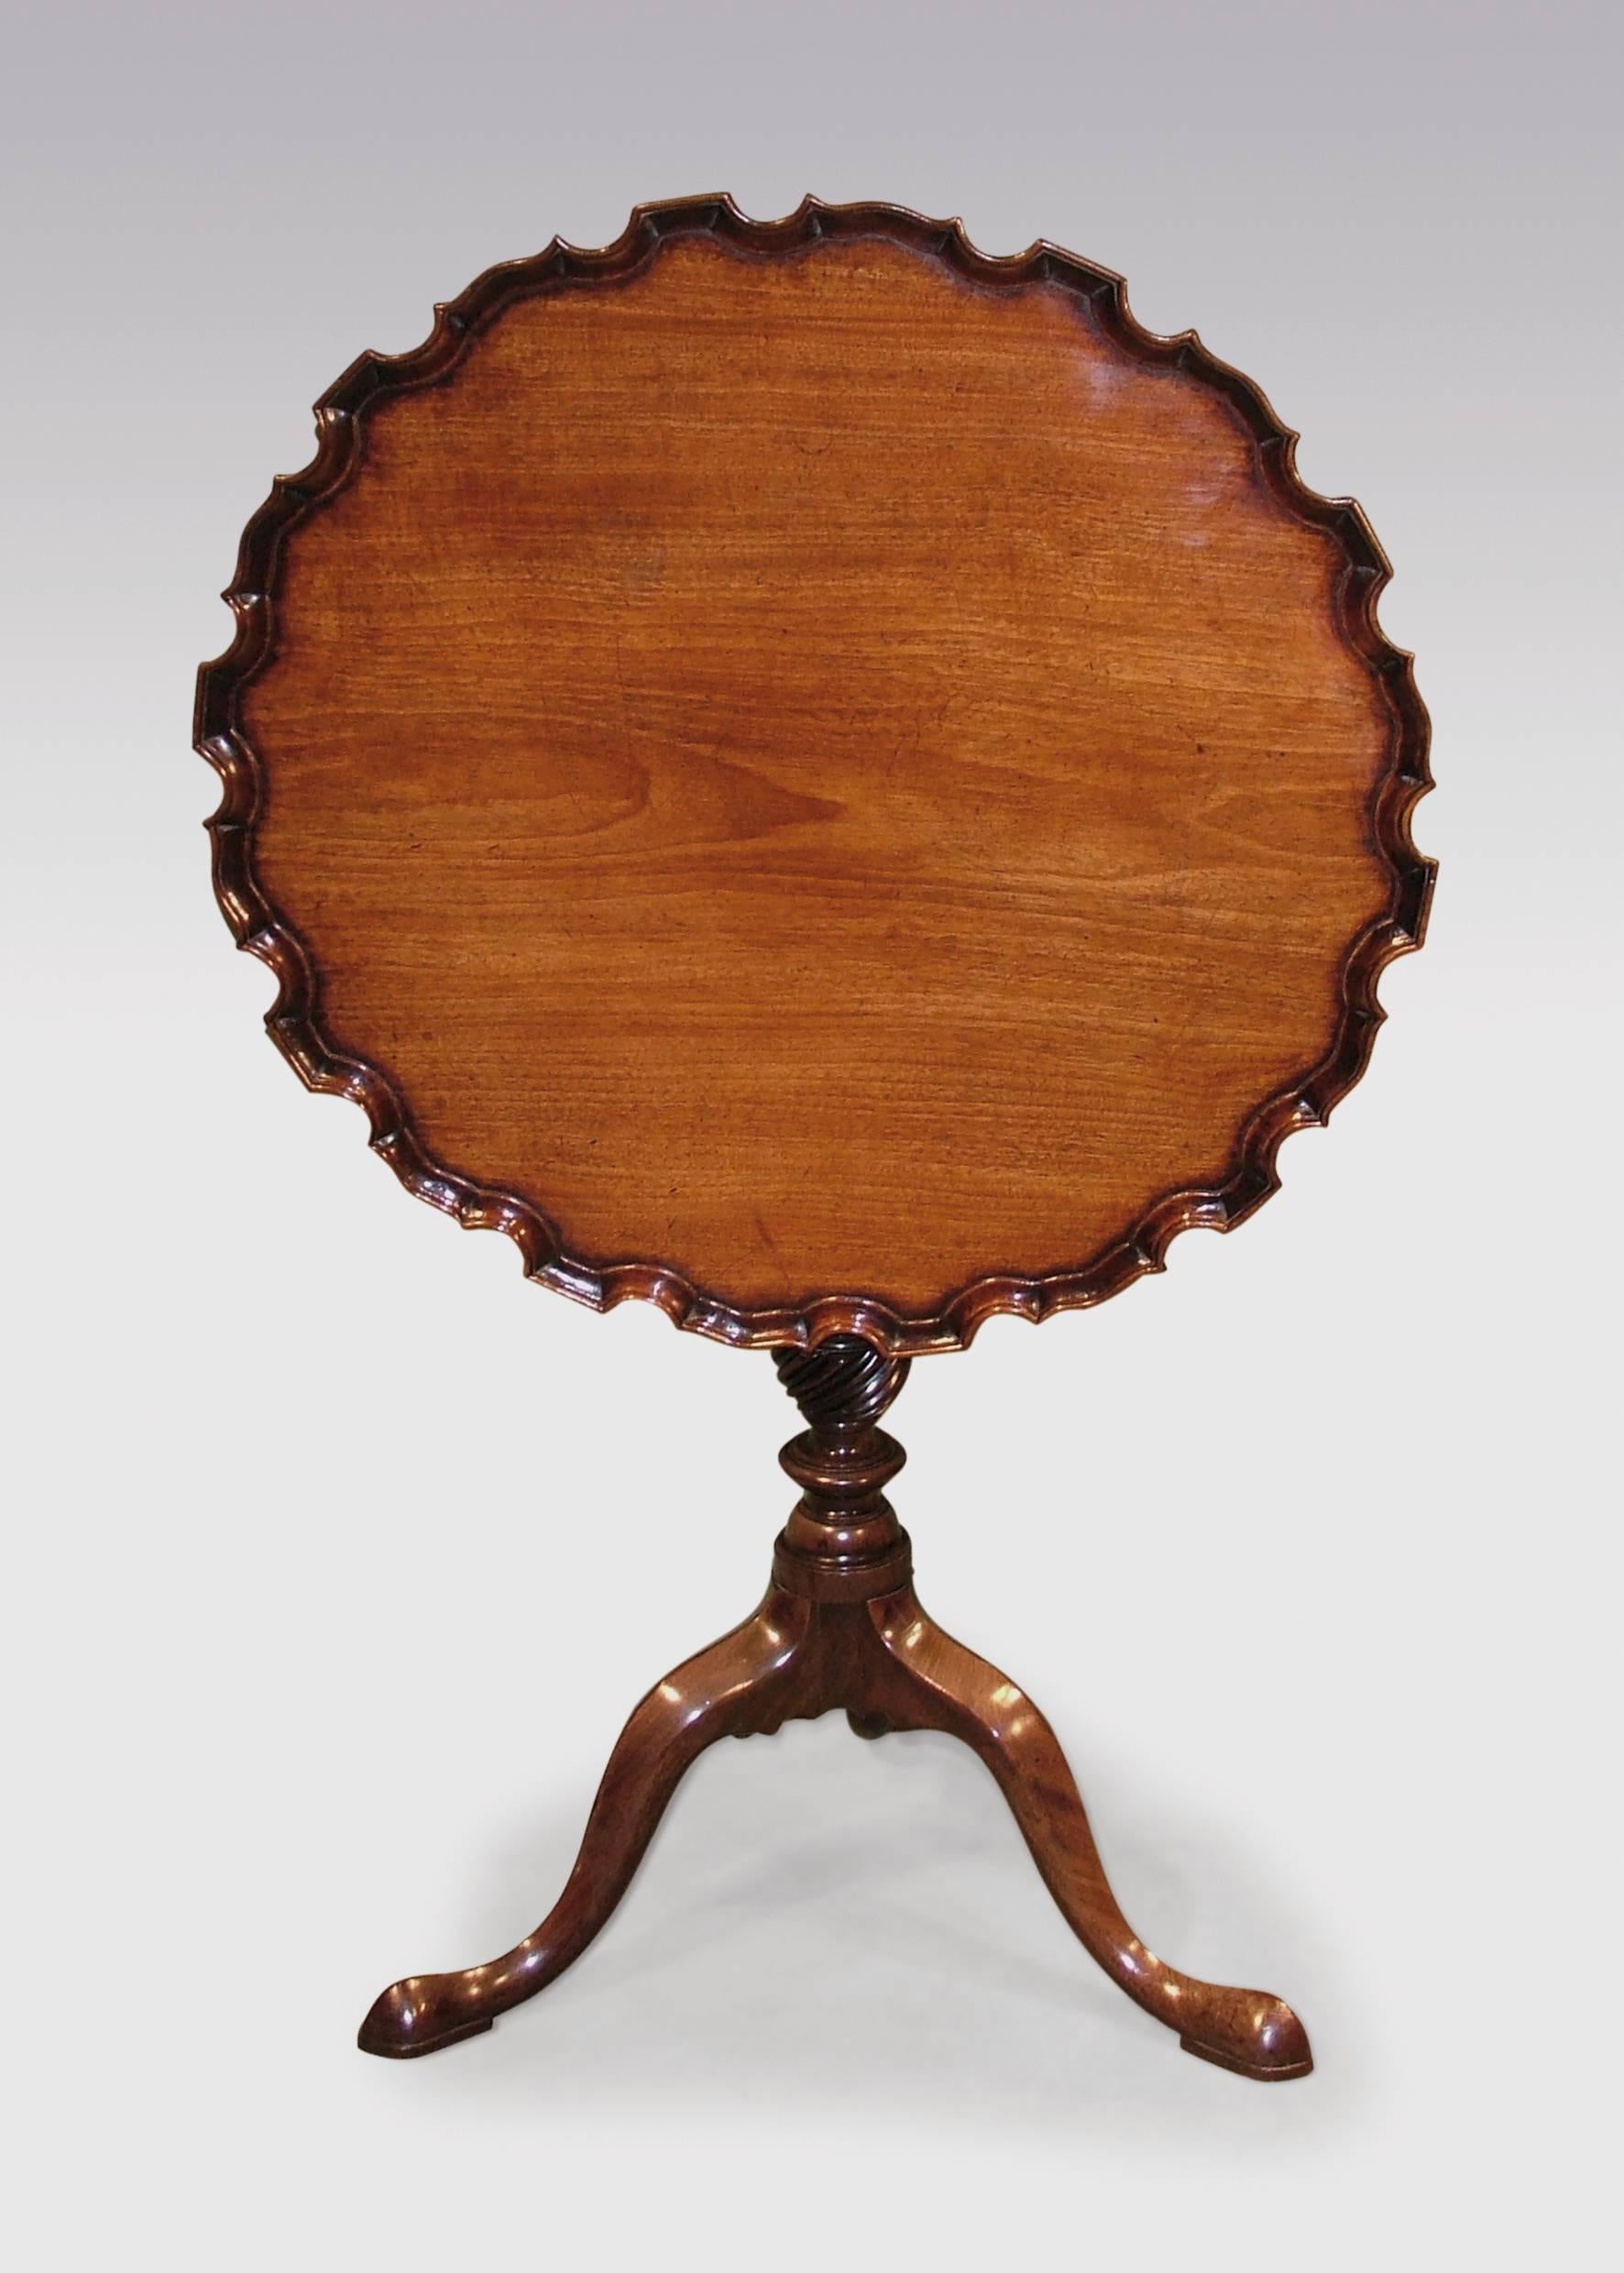 A mid-18th century Chippendale period figured mahogany tripod table, having well caved piecrust edge top, supported on gun-barrel stem with spiral twist urn, ending on shaped three-splay legs and pad feet.